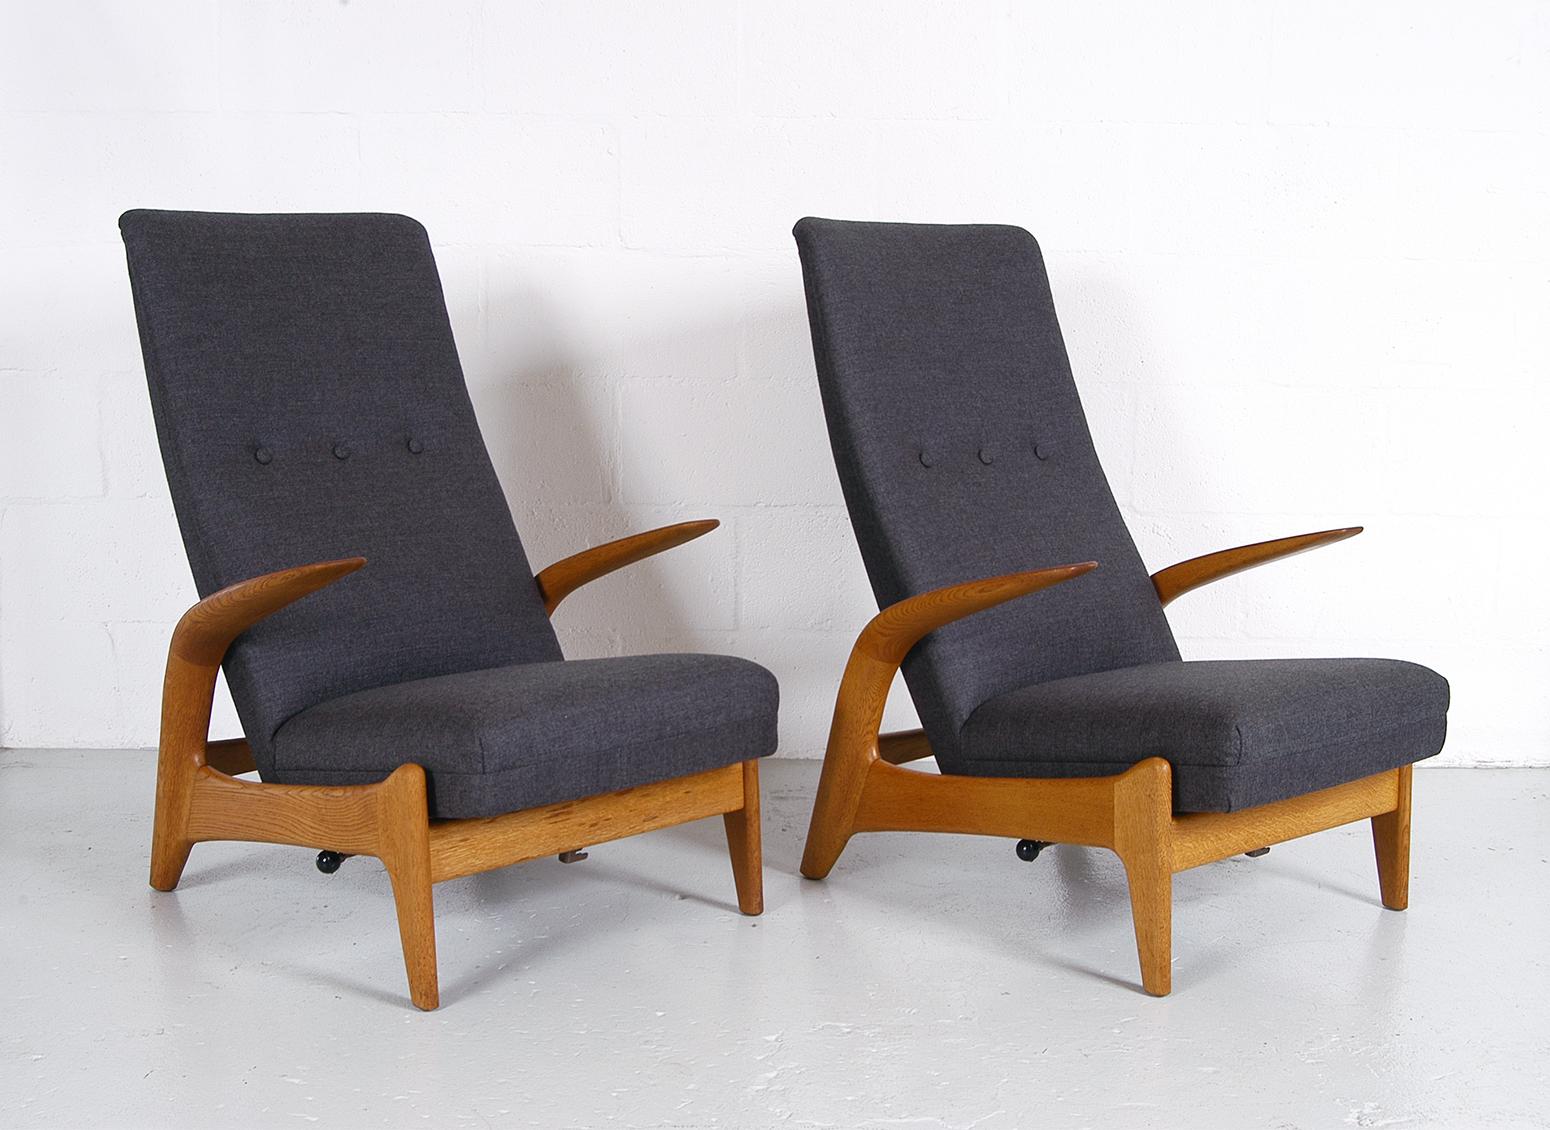 Designed in the mid-1950s by Rolf Rastad and Adolf Relling the Rock ‘n’ rest chair was designed in Norway for Arnestad Bruk, and was an instant success, imported into the UK to be retailed by Gimson & Slater. They feature an ingenious reclining